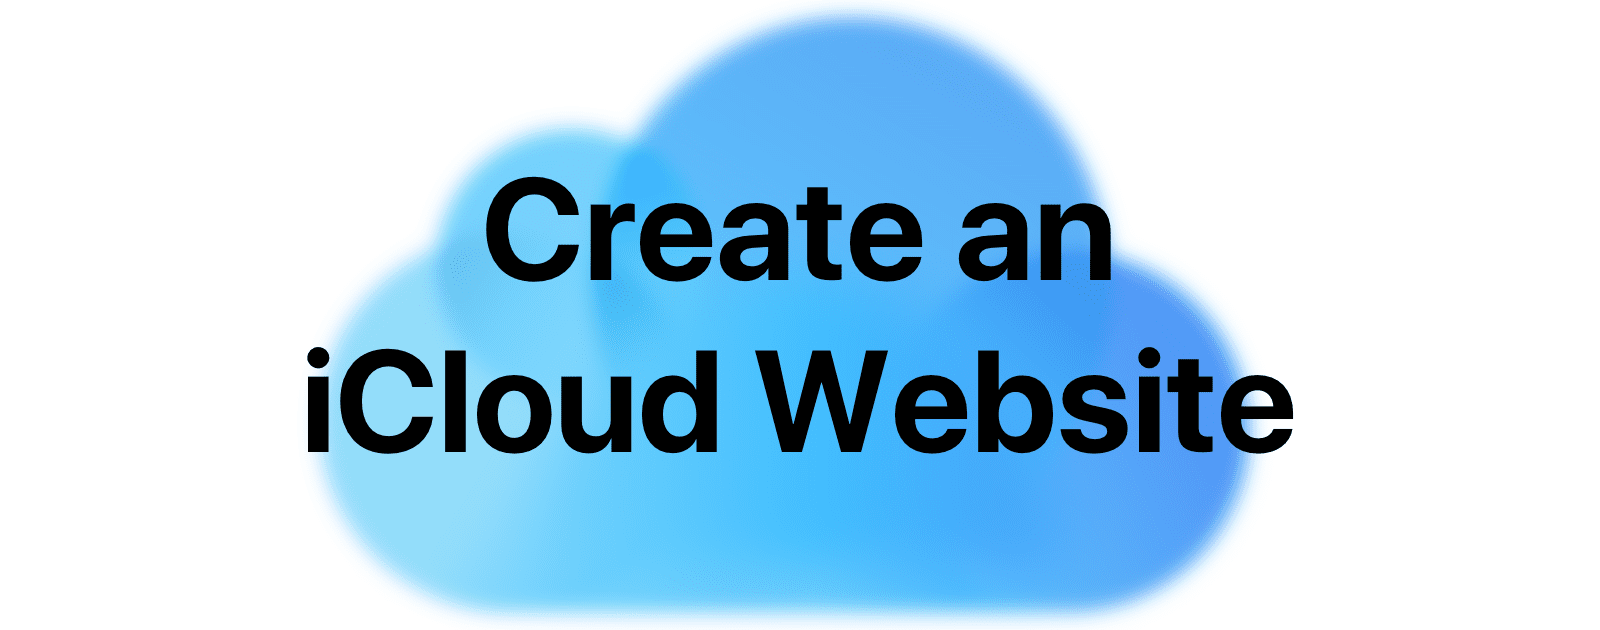 iOS: How to Create an iCloud Website For Your Photos